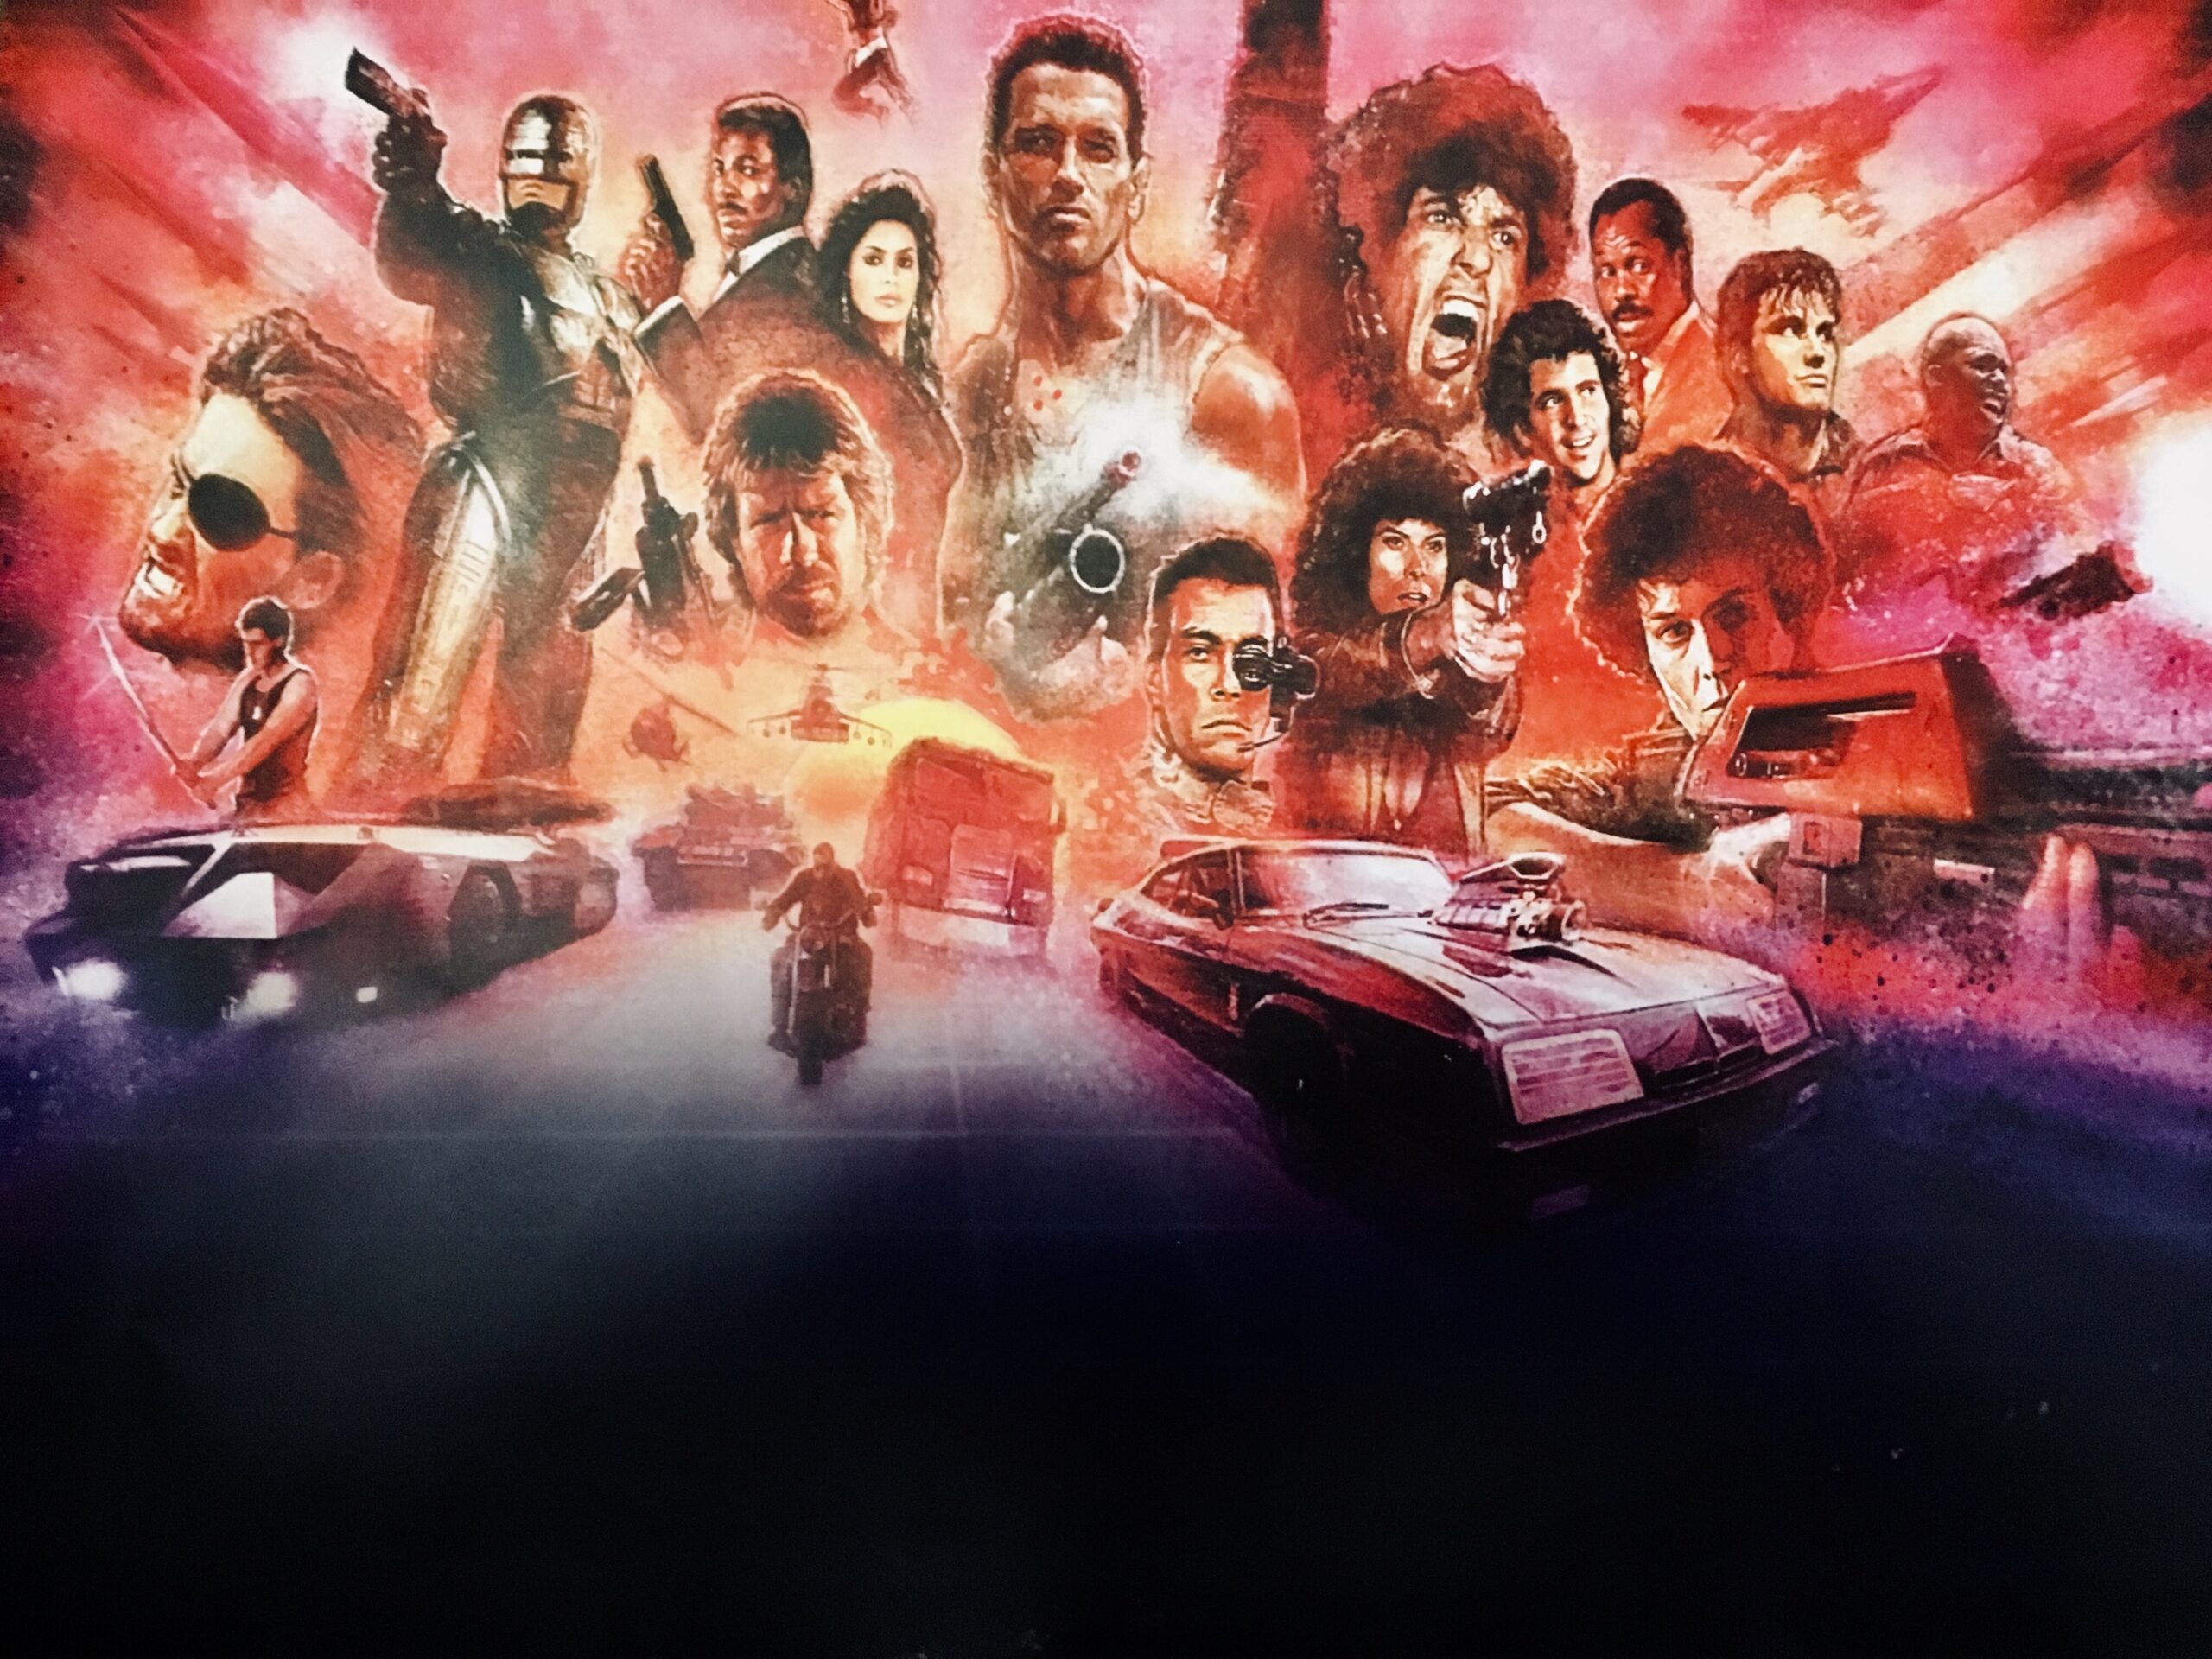 In Search of the Last Action Heroes (2019) Review - The Acti